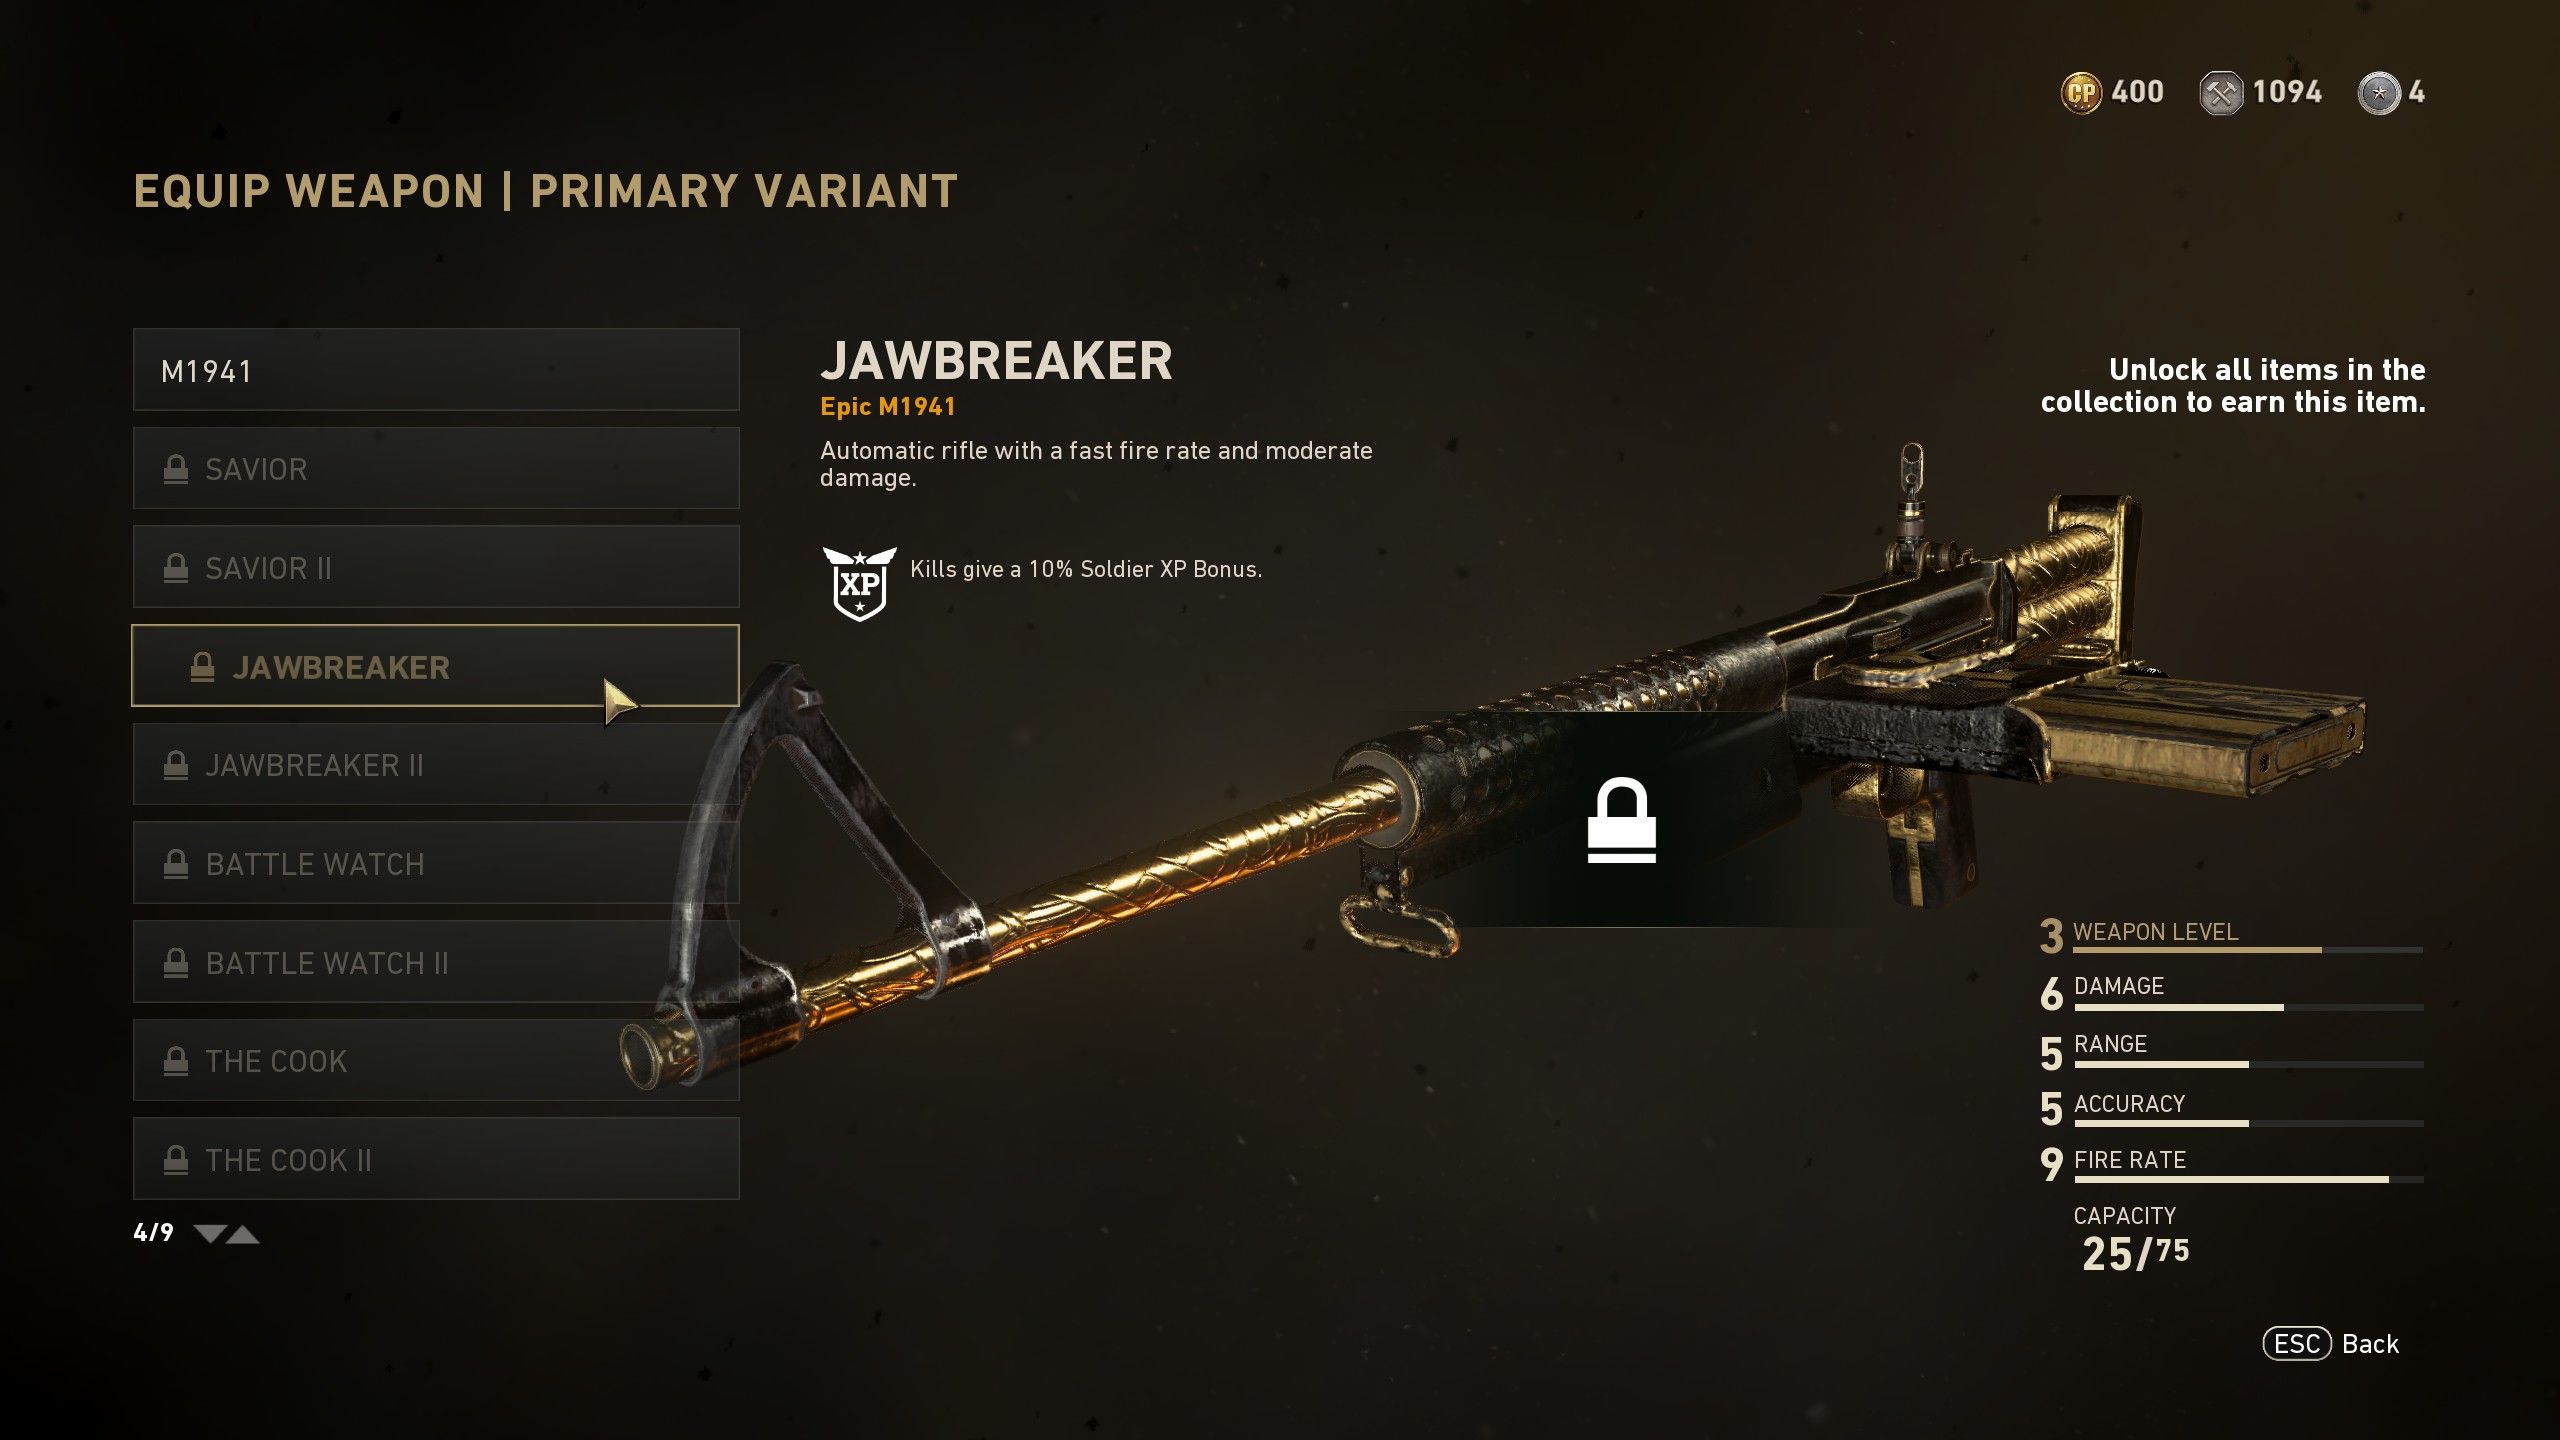 Call of Duty Weapon Variants